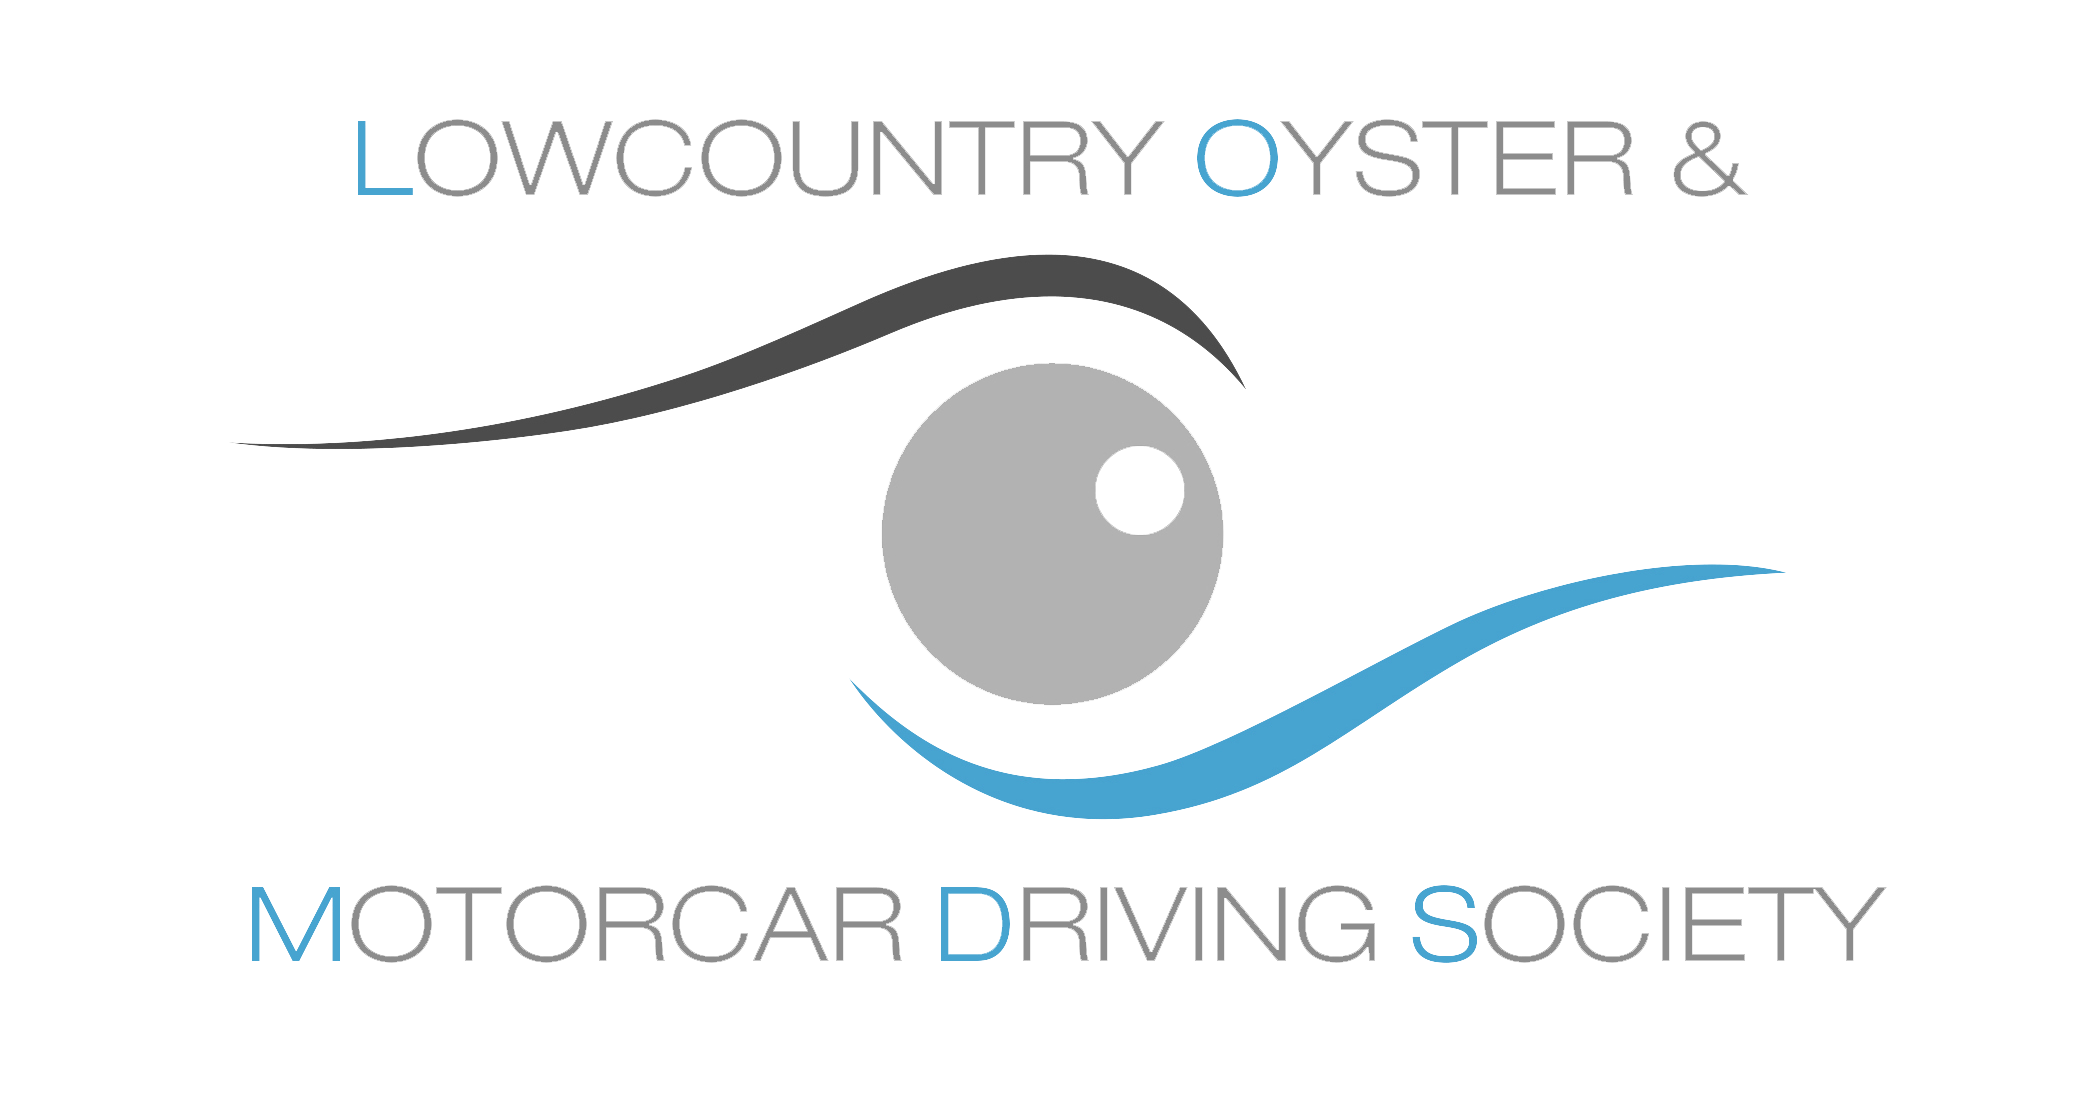 Lowcountry Oyster &amp; Motorcar Driving Society